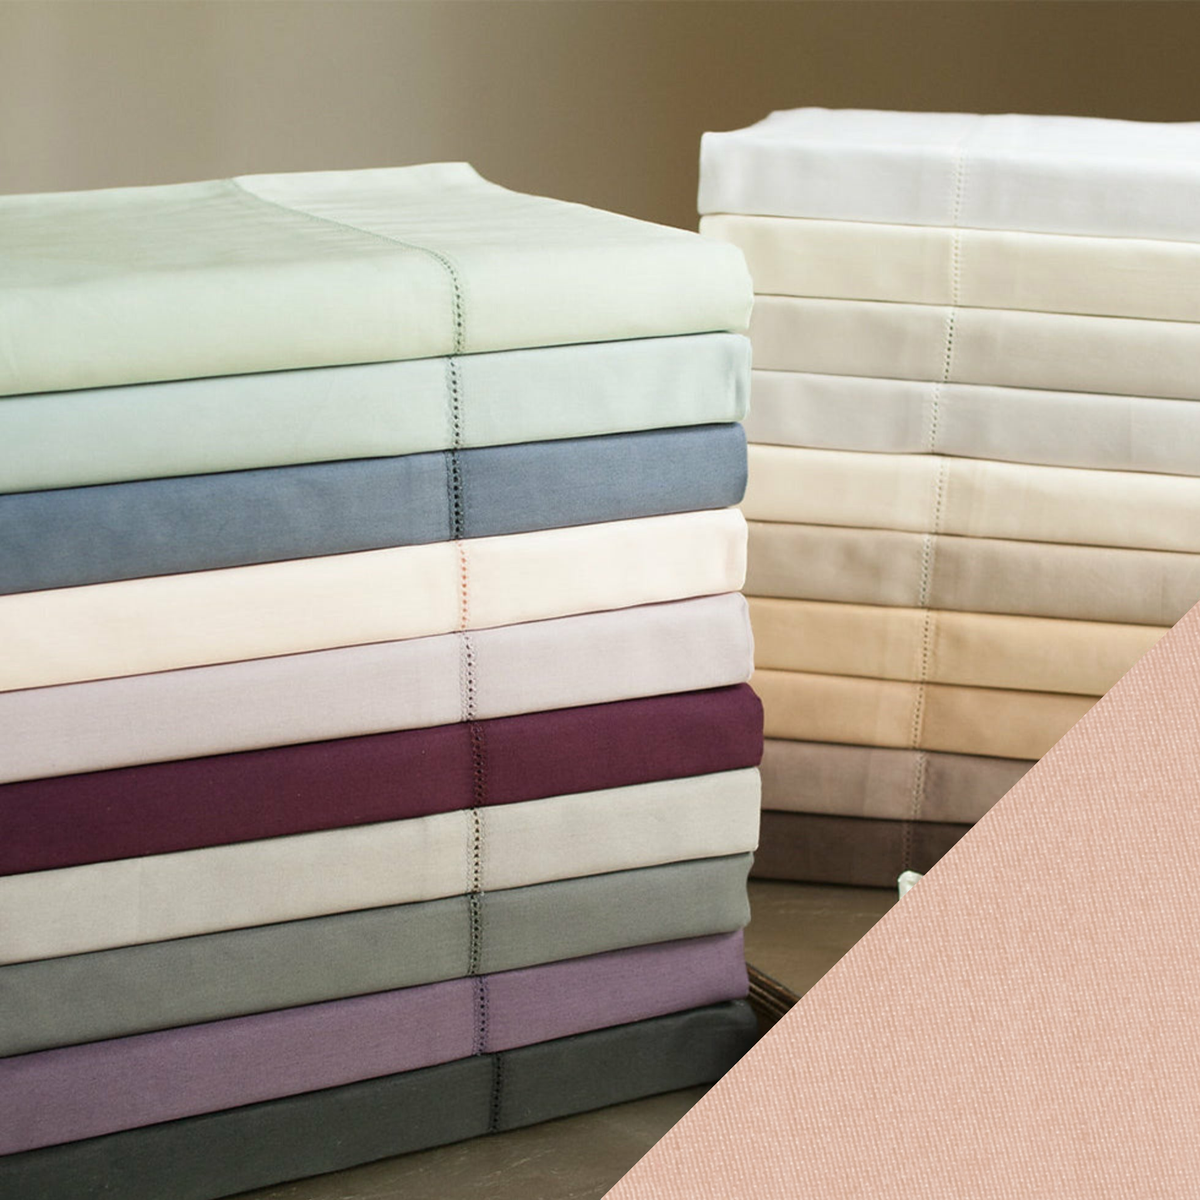 Stack of Home Treasures Royal Sateen Bedding with Blush Color Swatch